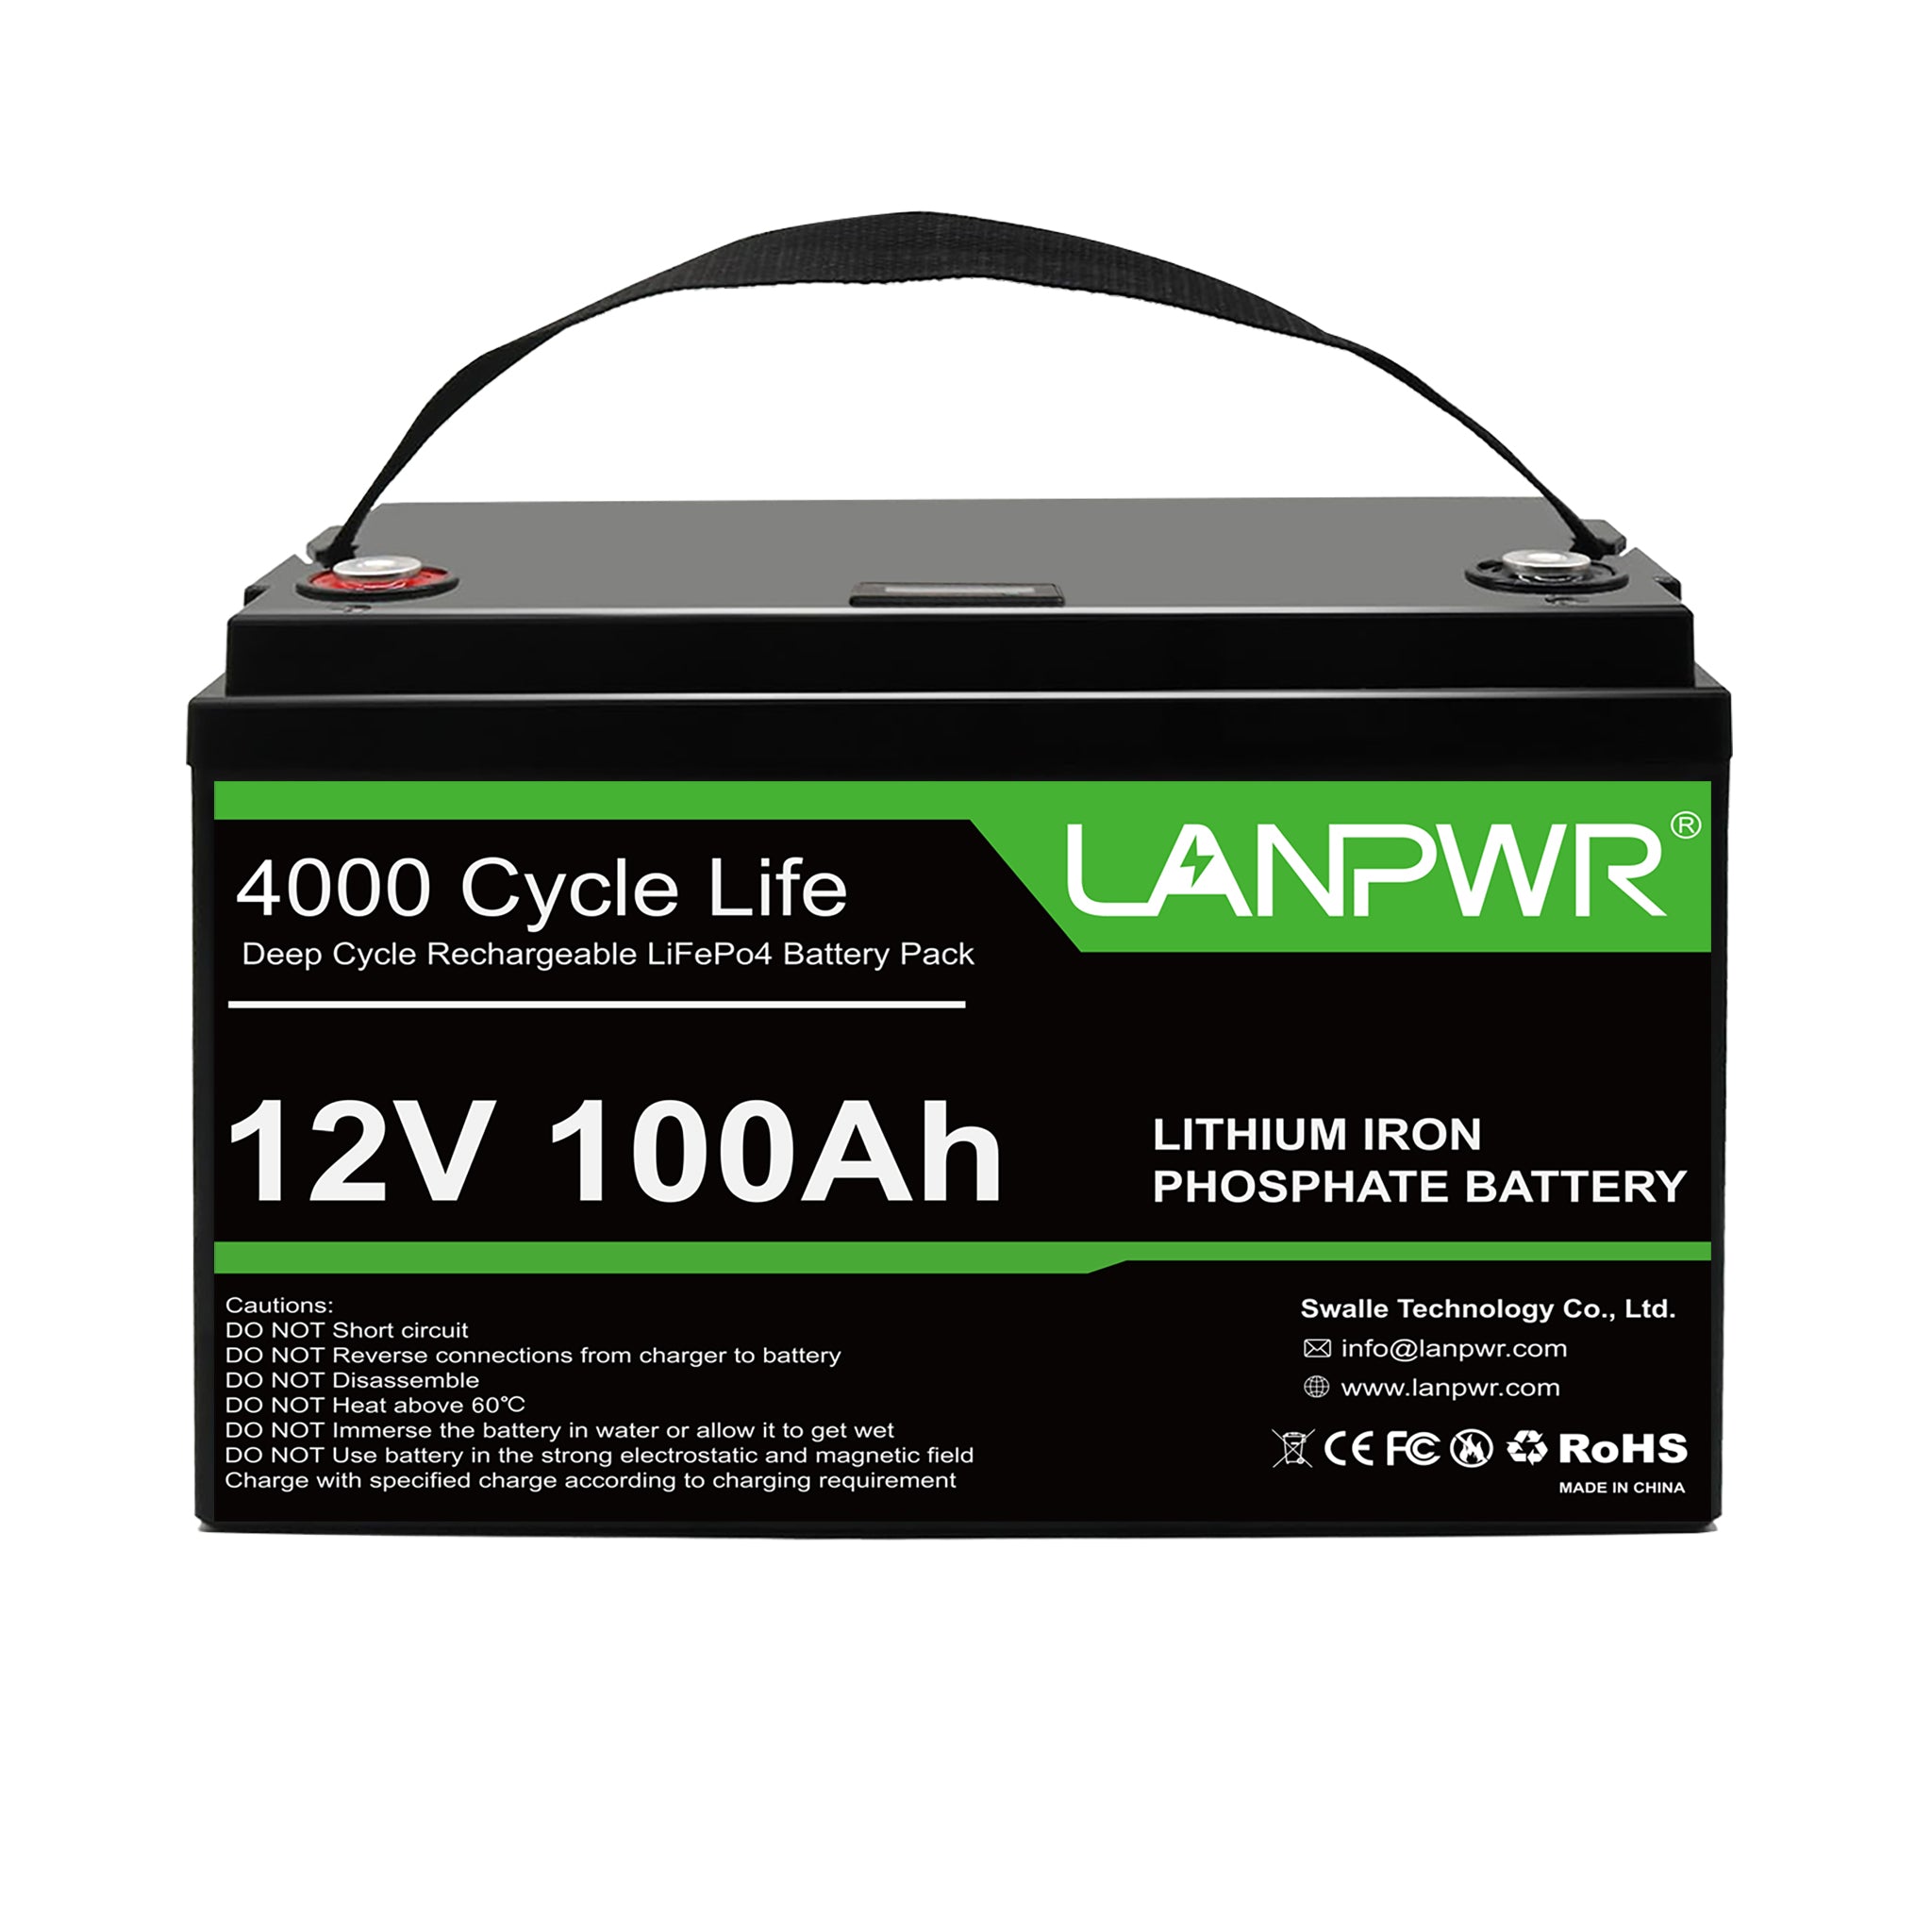 LANPWR 12V 100Ah LiFePO4 Battery with 4000+ Deep Cycles & Built-In 100A BMS, 1280Wh Best RV Lithium Battery